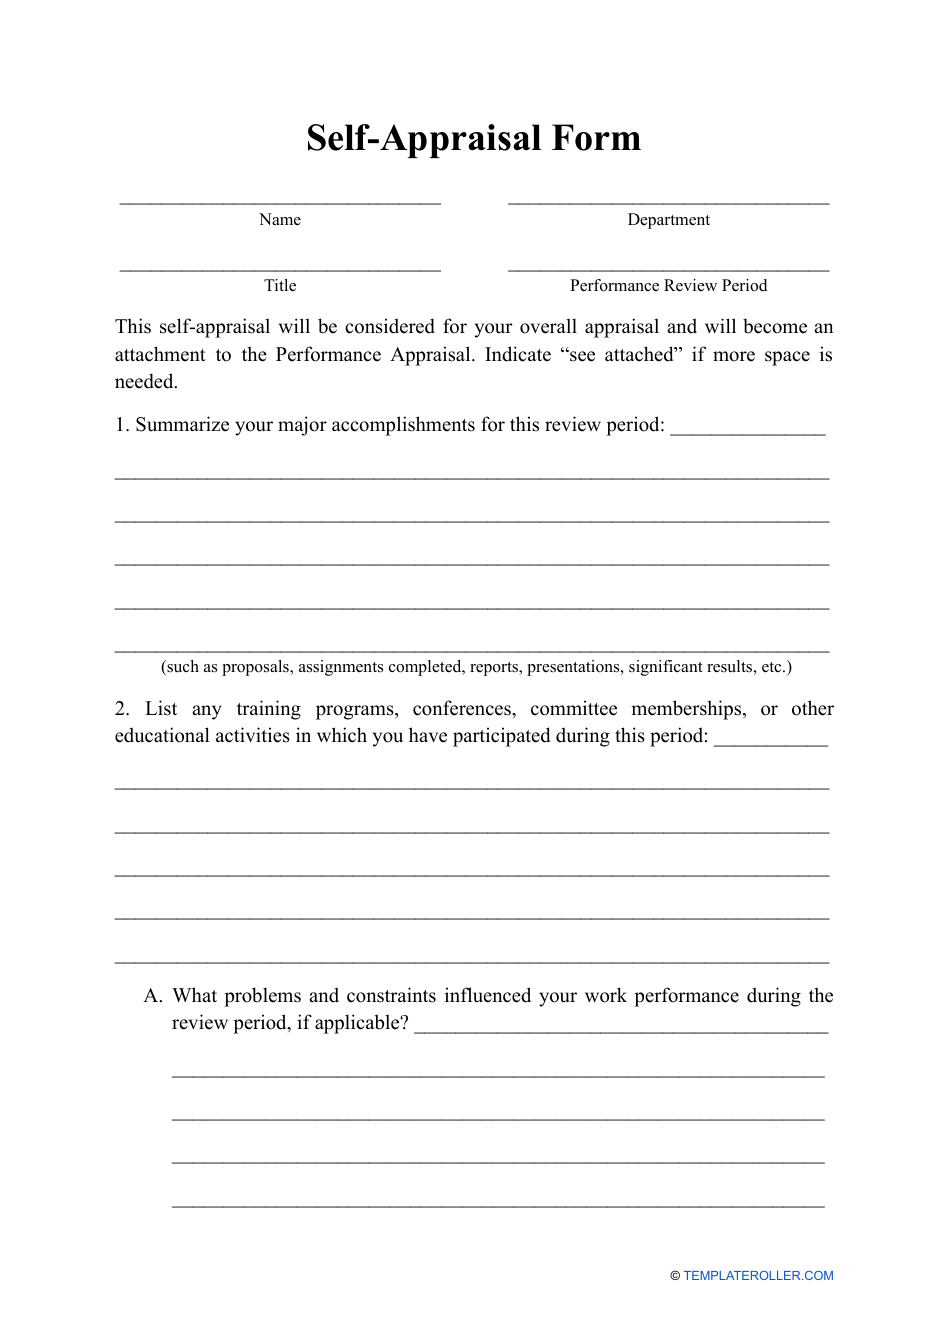 Self-appraisal Form, Page 1